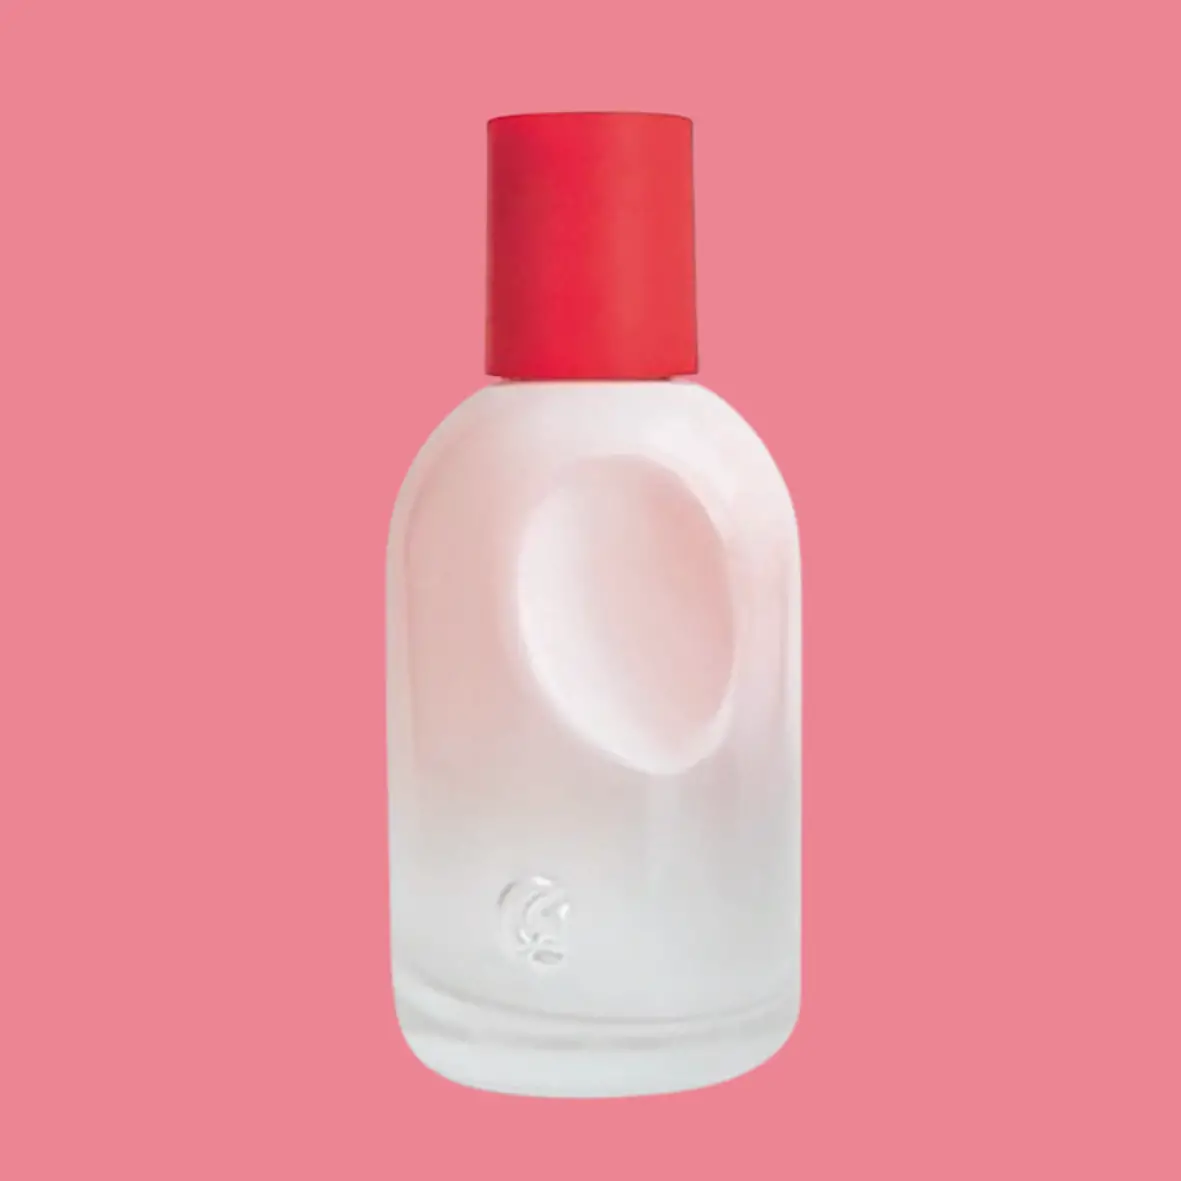 Glossier You Perfume
Best Violet Perfumes